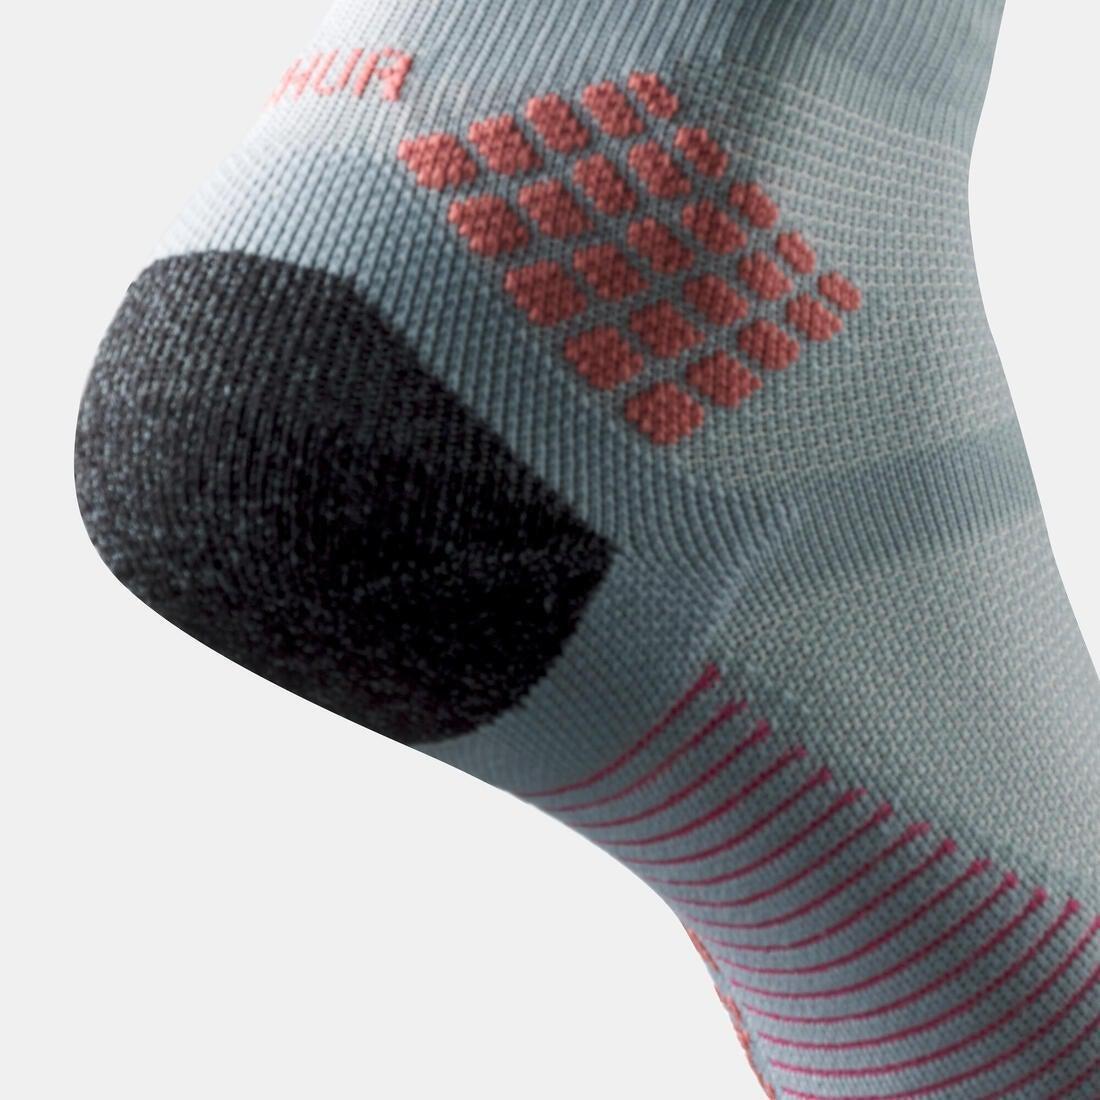 QUECHUA - Walking Socks - 2 Pack, Mouse Grey